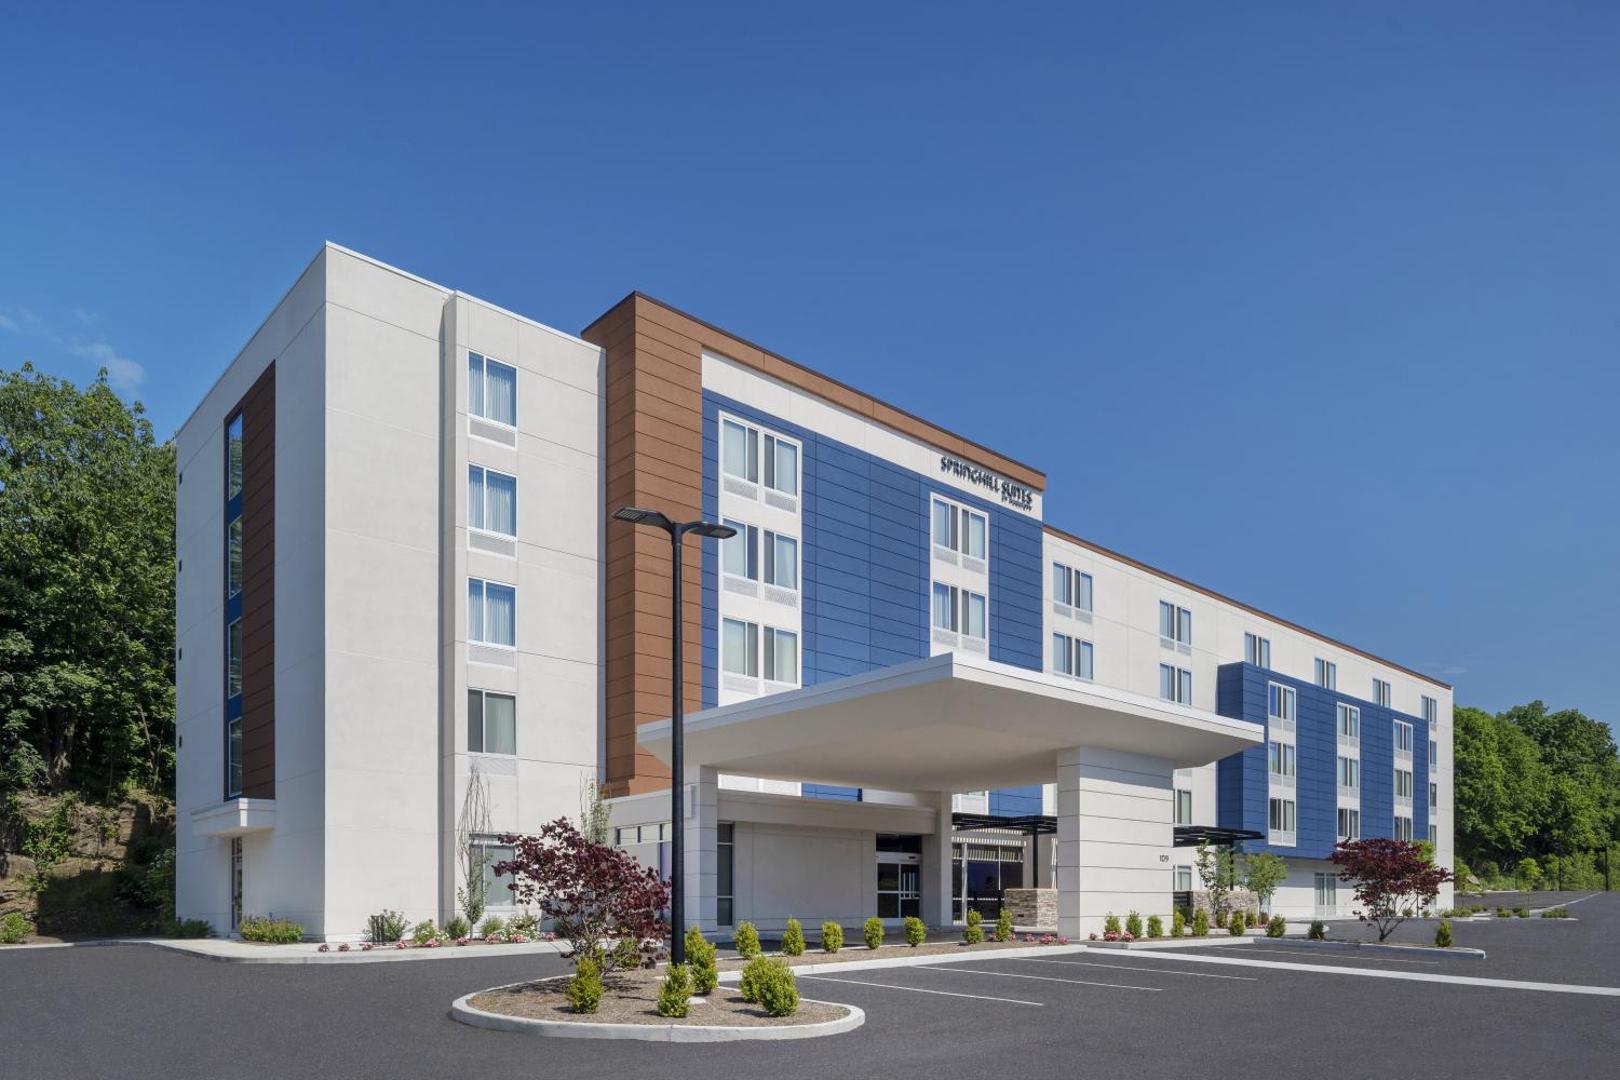 SpringHill Suites Tuckahoe Westchester County